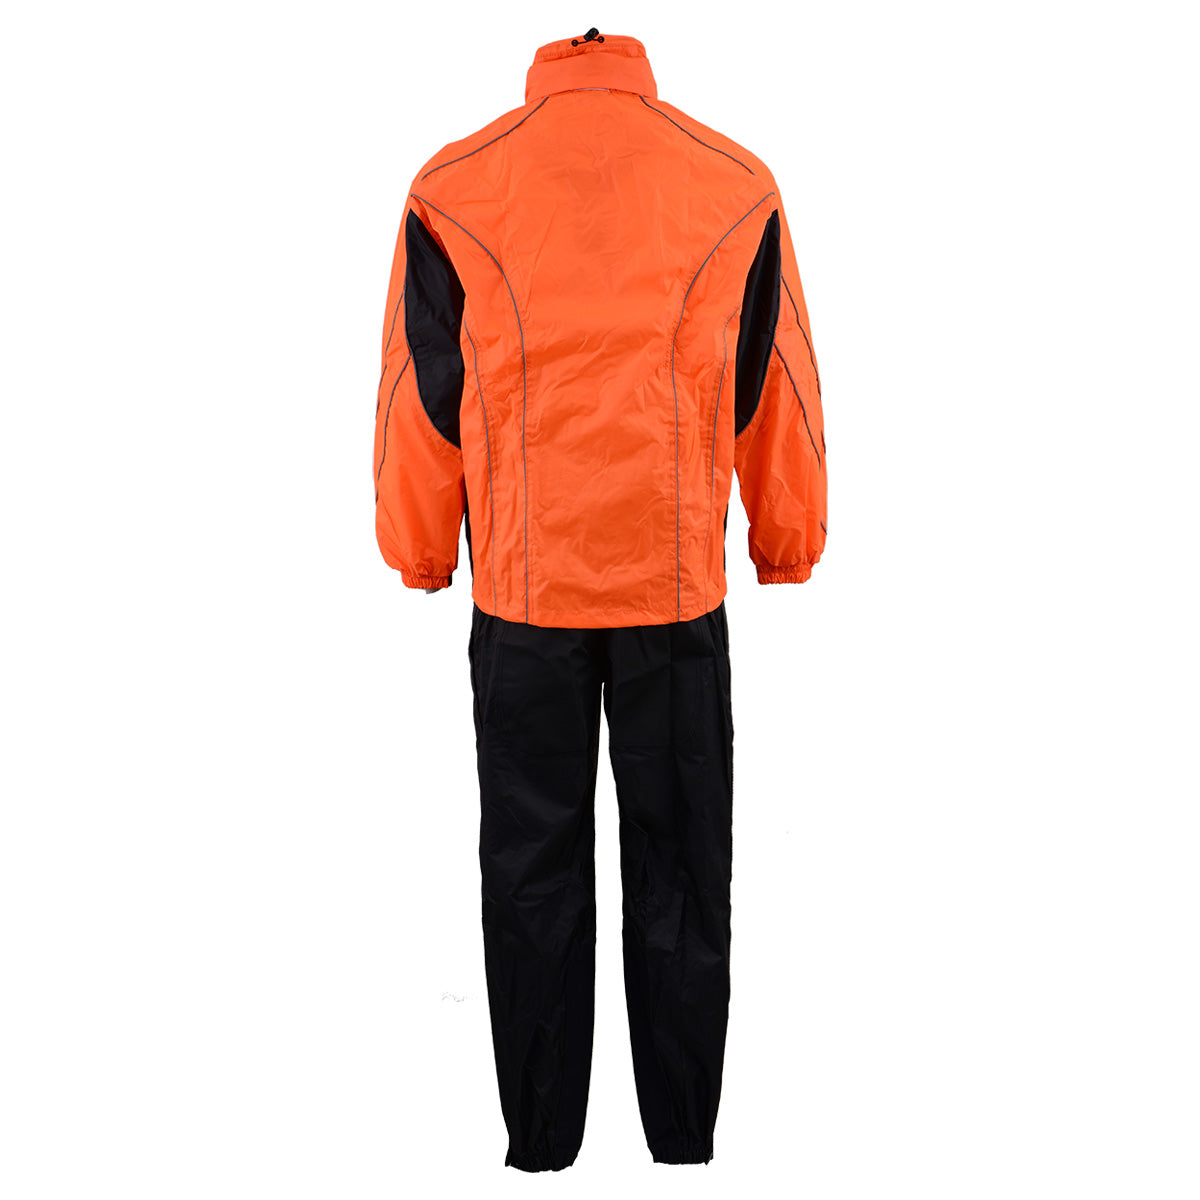 NexGen Men’s XS5020 Orange and Black Hooded Hi Visibility Water Proof Rain Suit with Reflective Piping